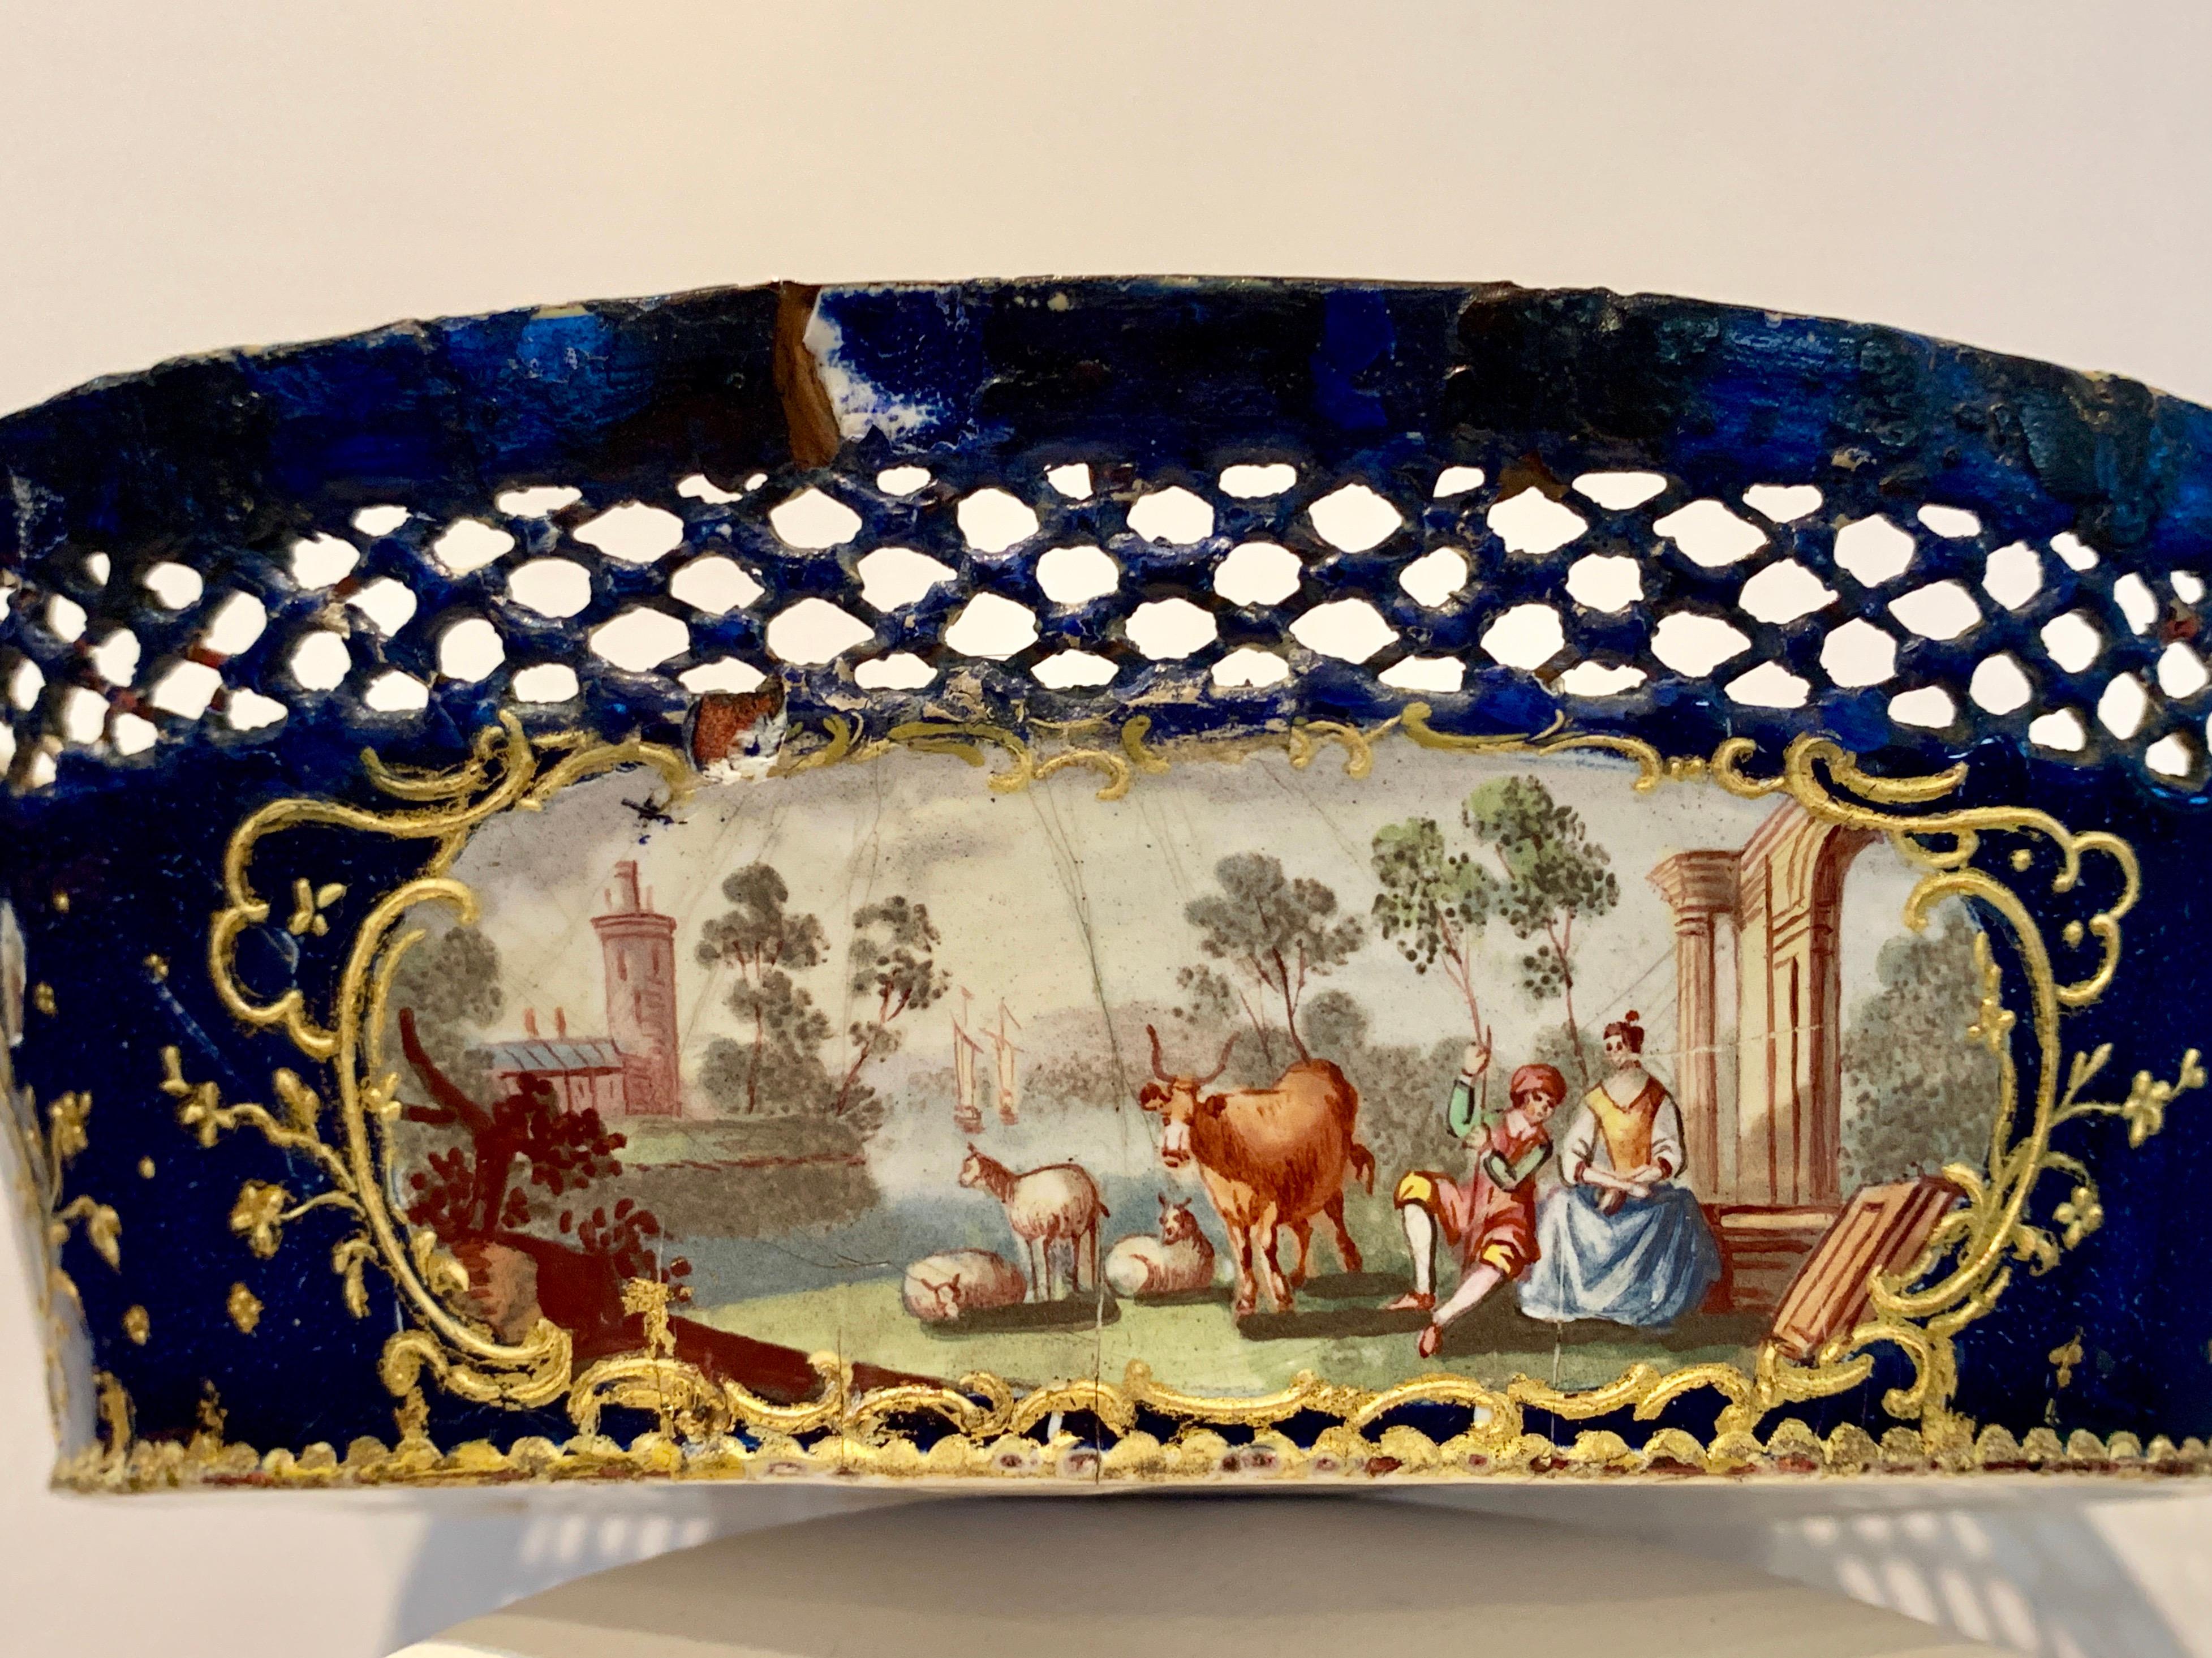 Royal and diplomatic gifts.
Just as at Meissen, Sèvres was a popular factory for the commission and production of royal and diplomatic gifts, as well as for direct purchases by royal families and the aristocracy. Marie Antoinette was an early